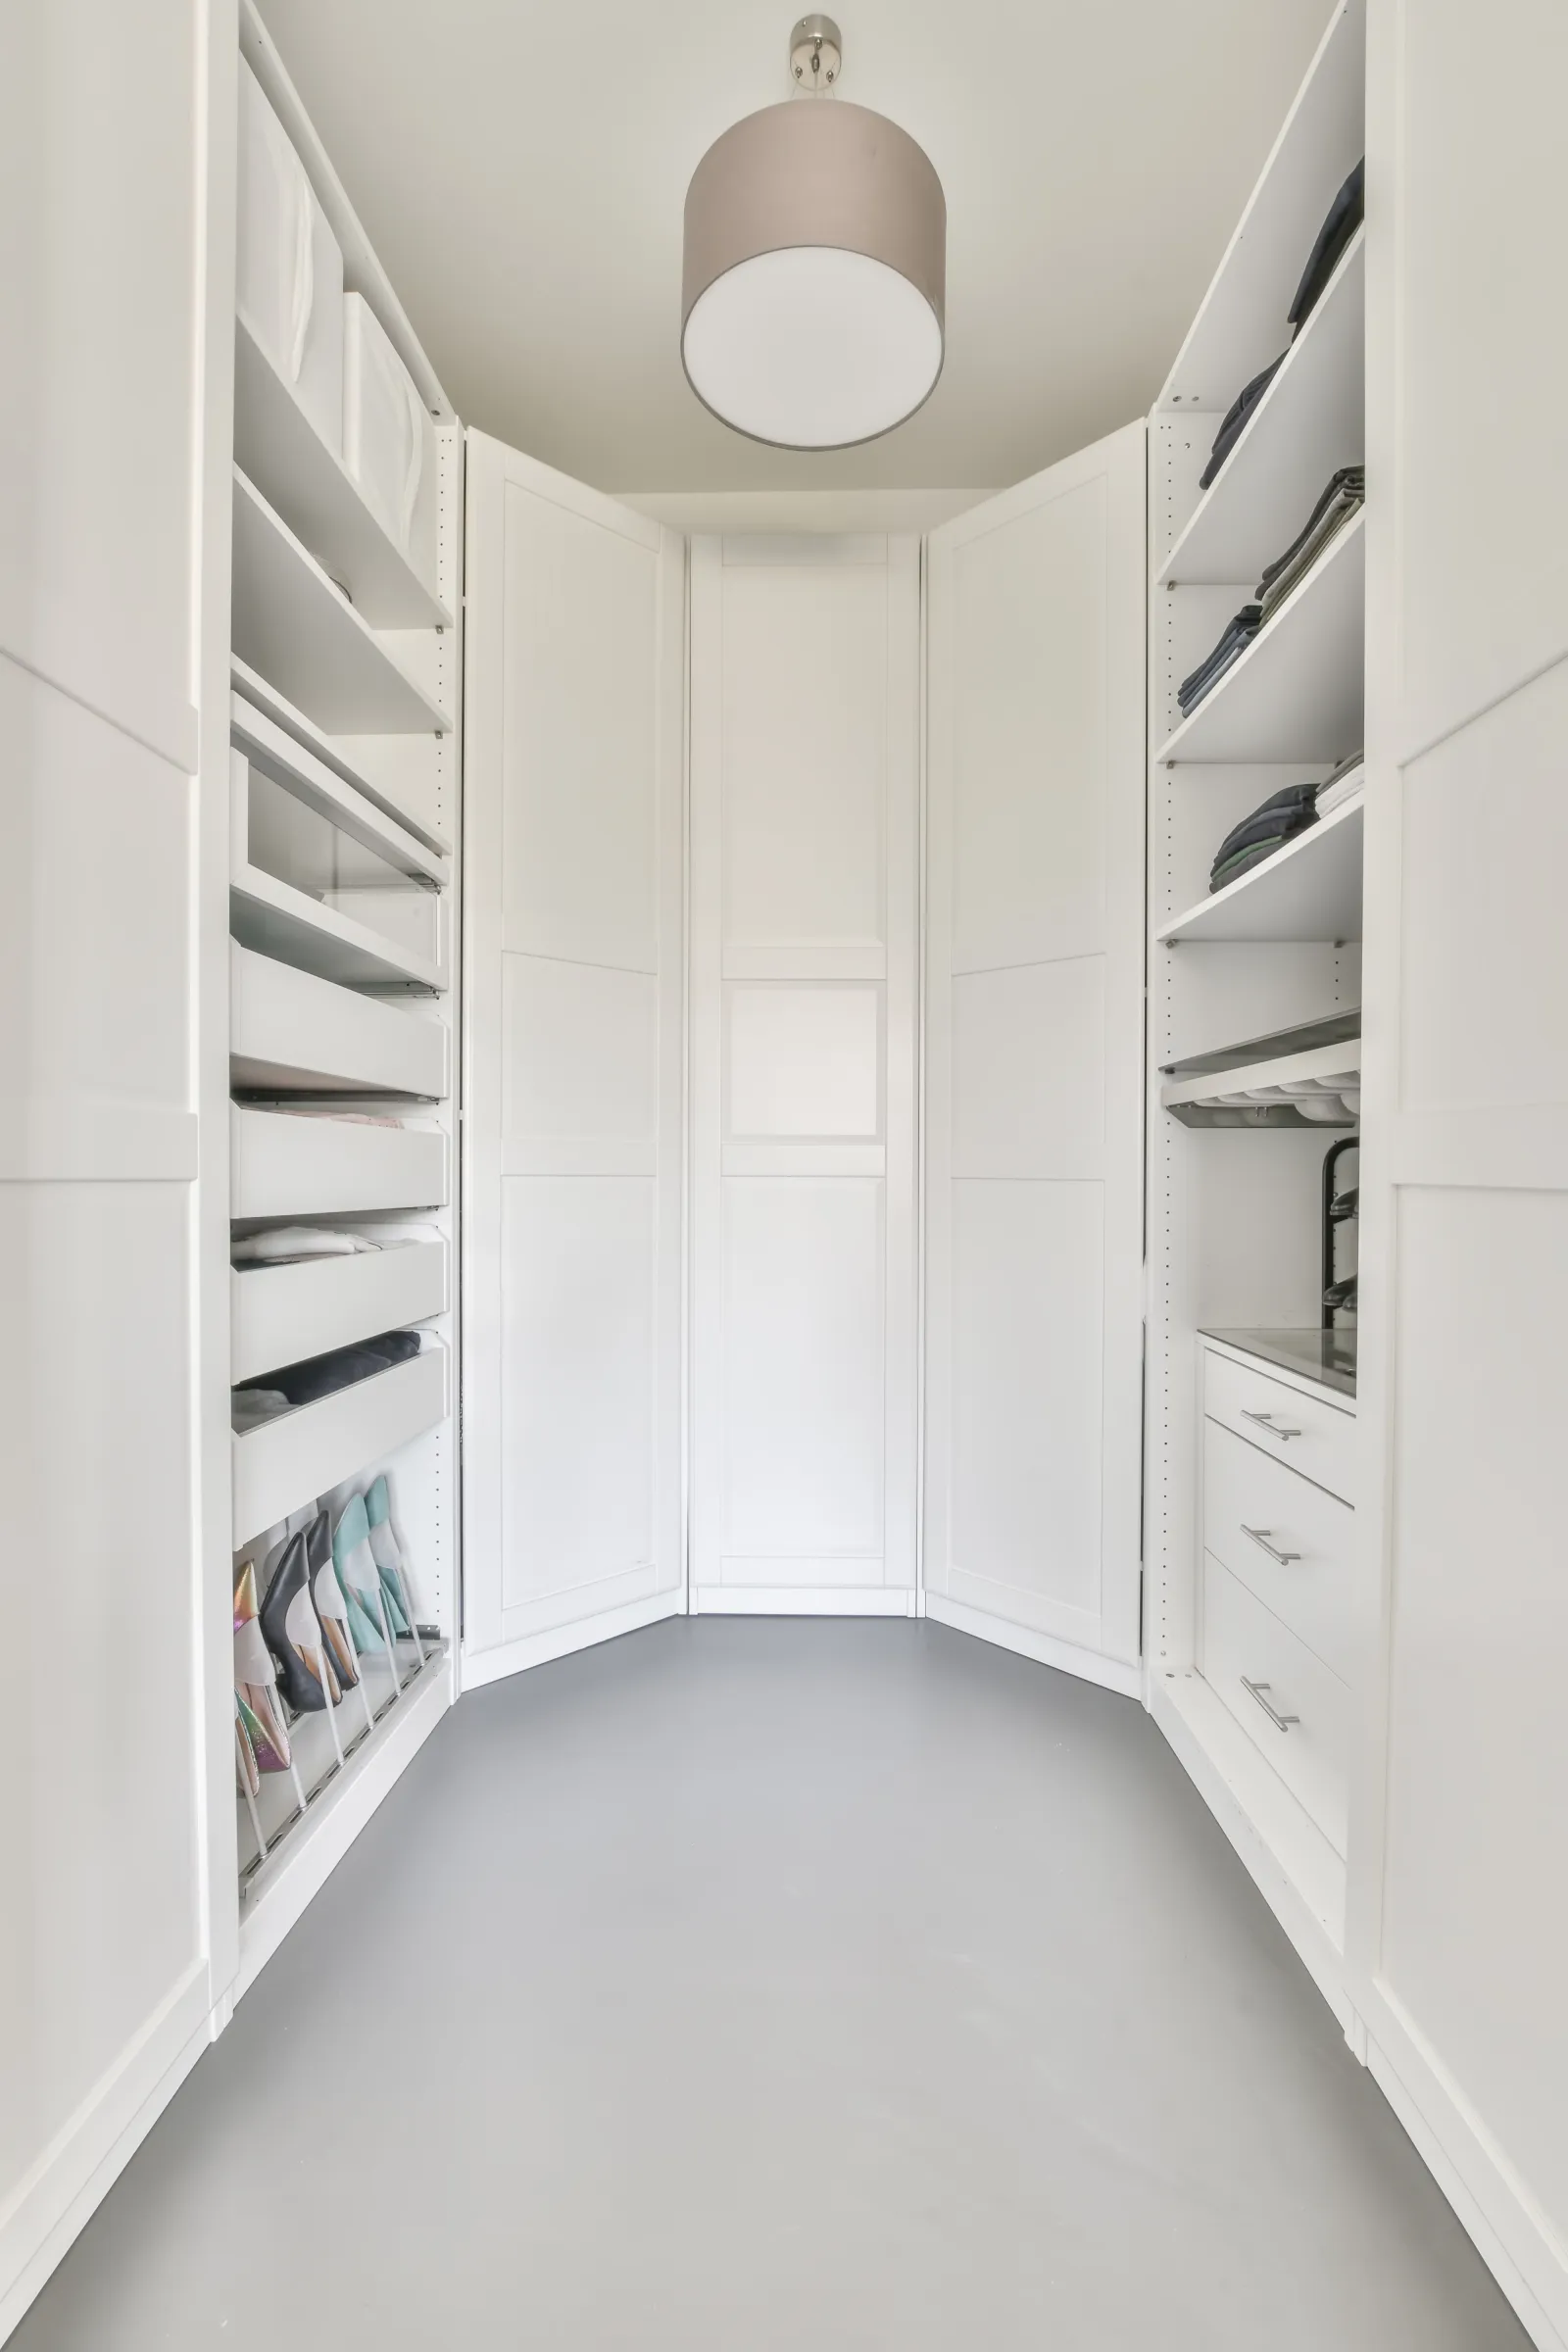 Does a Custom Closet Increase the Value of Your Home?